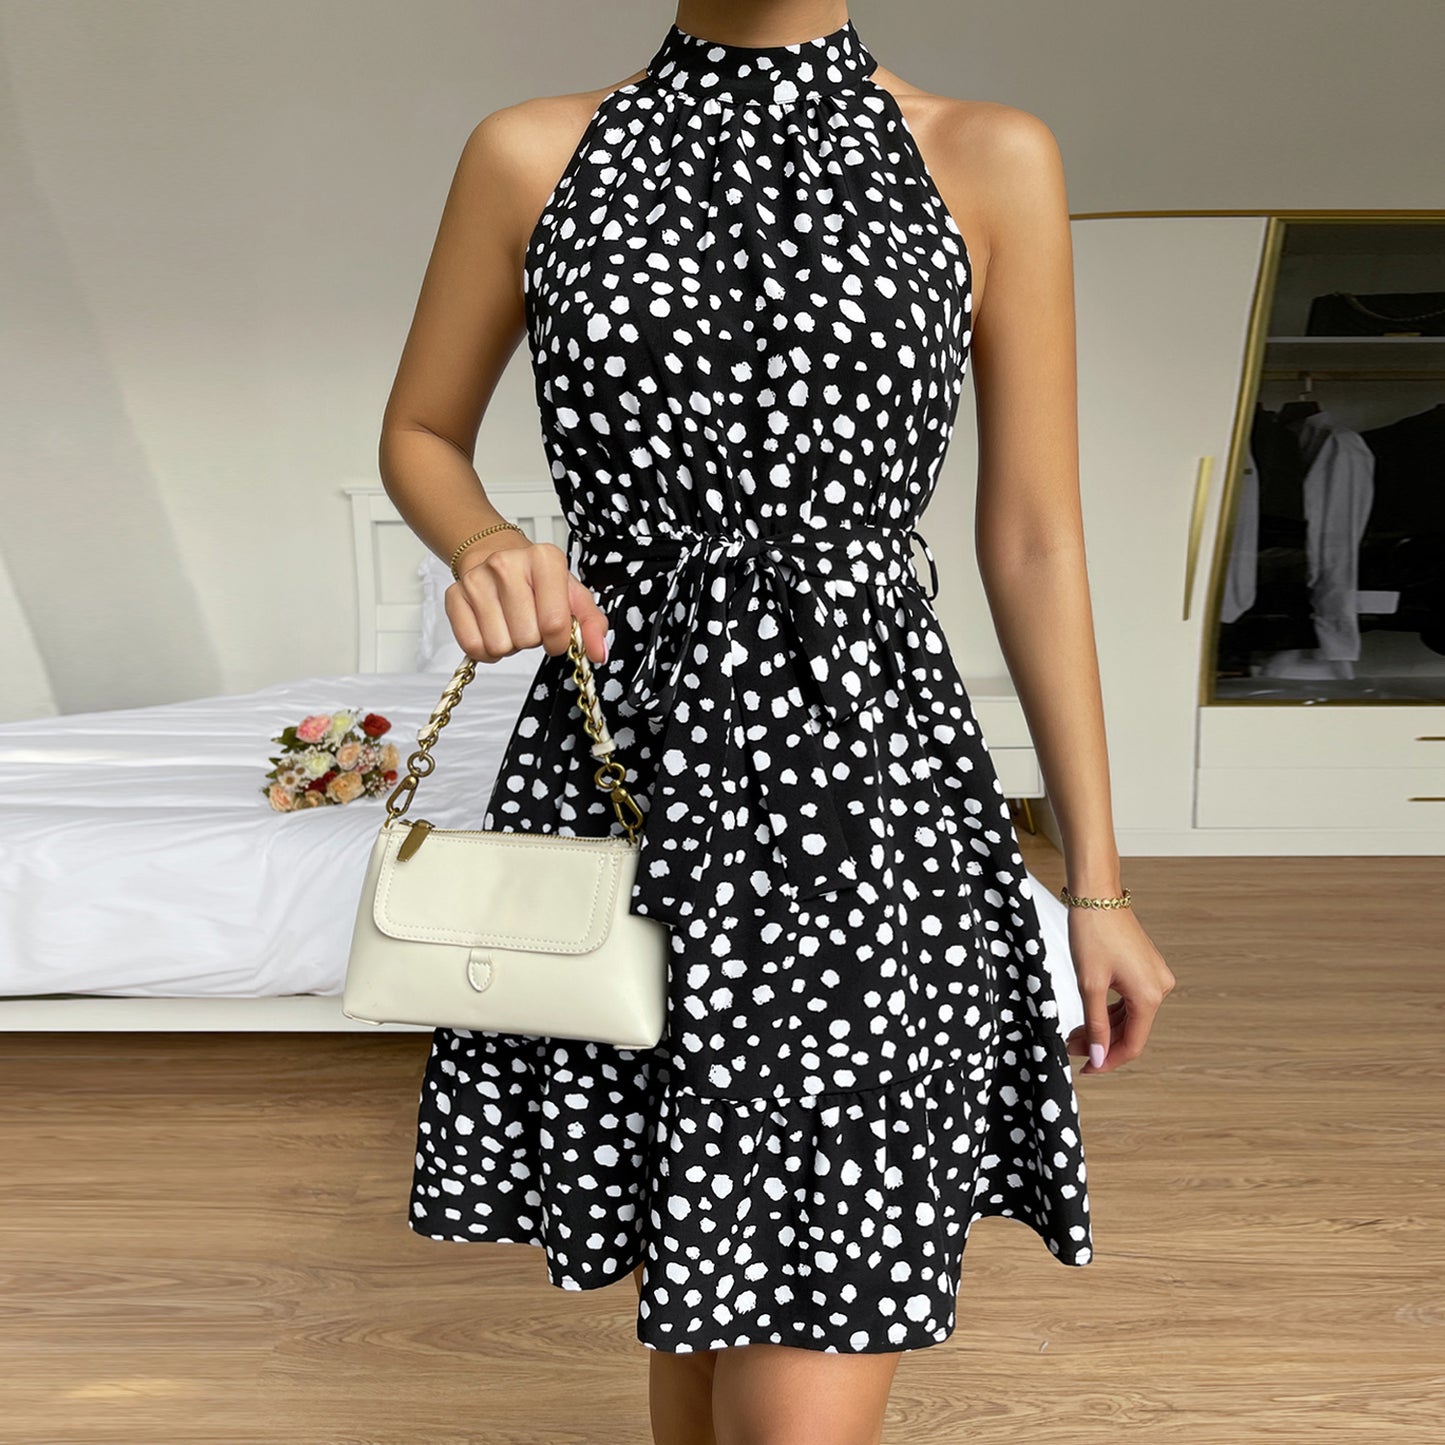 YESFASHION Women Clothing Halter Neck Small High-neck Floral Dress